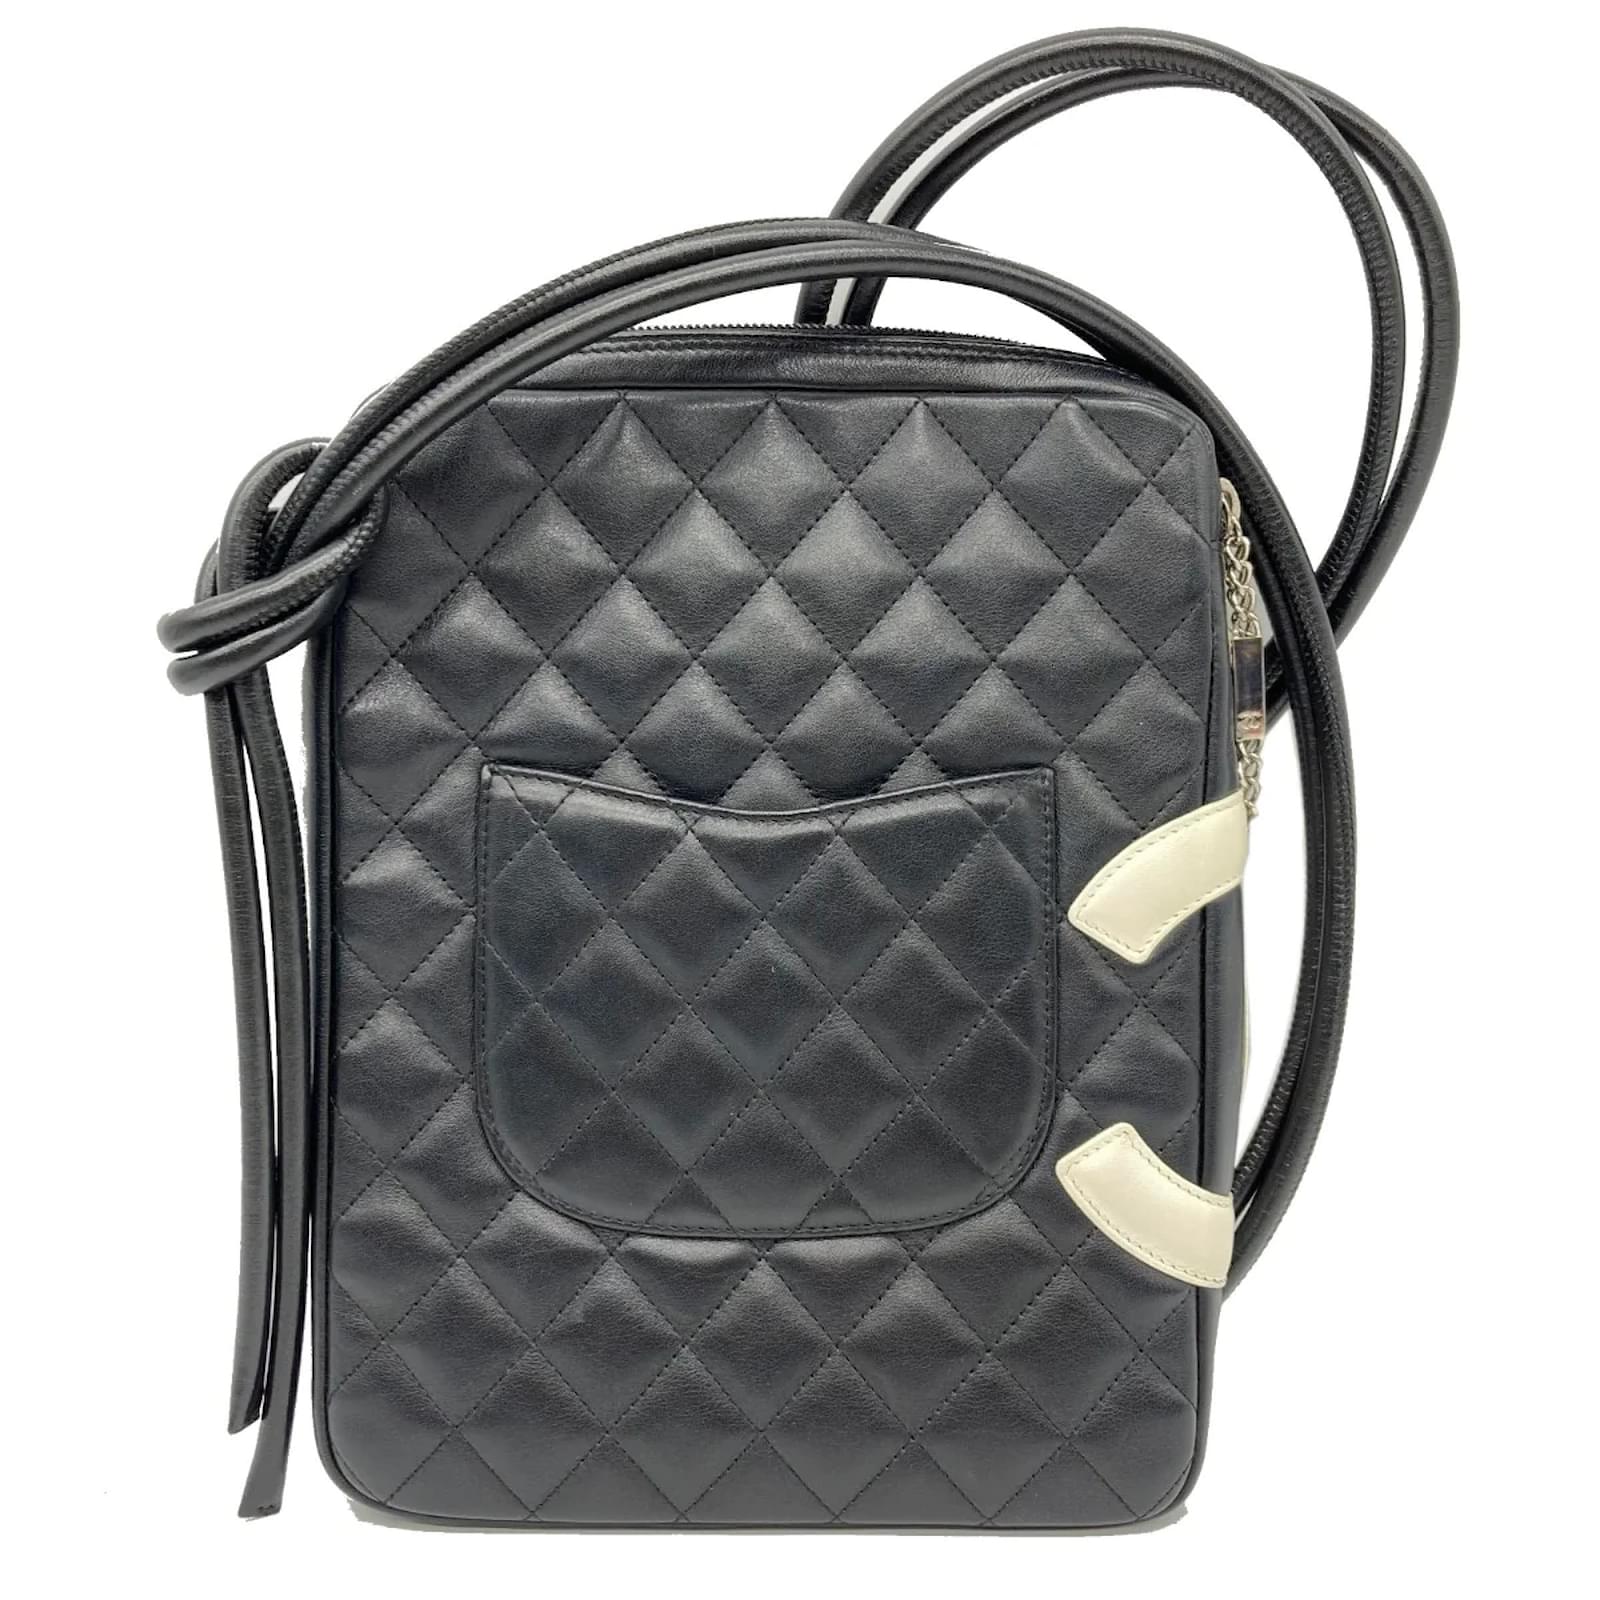 Chanel Cambon Leather Crossbody Bag In Black